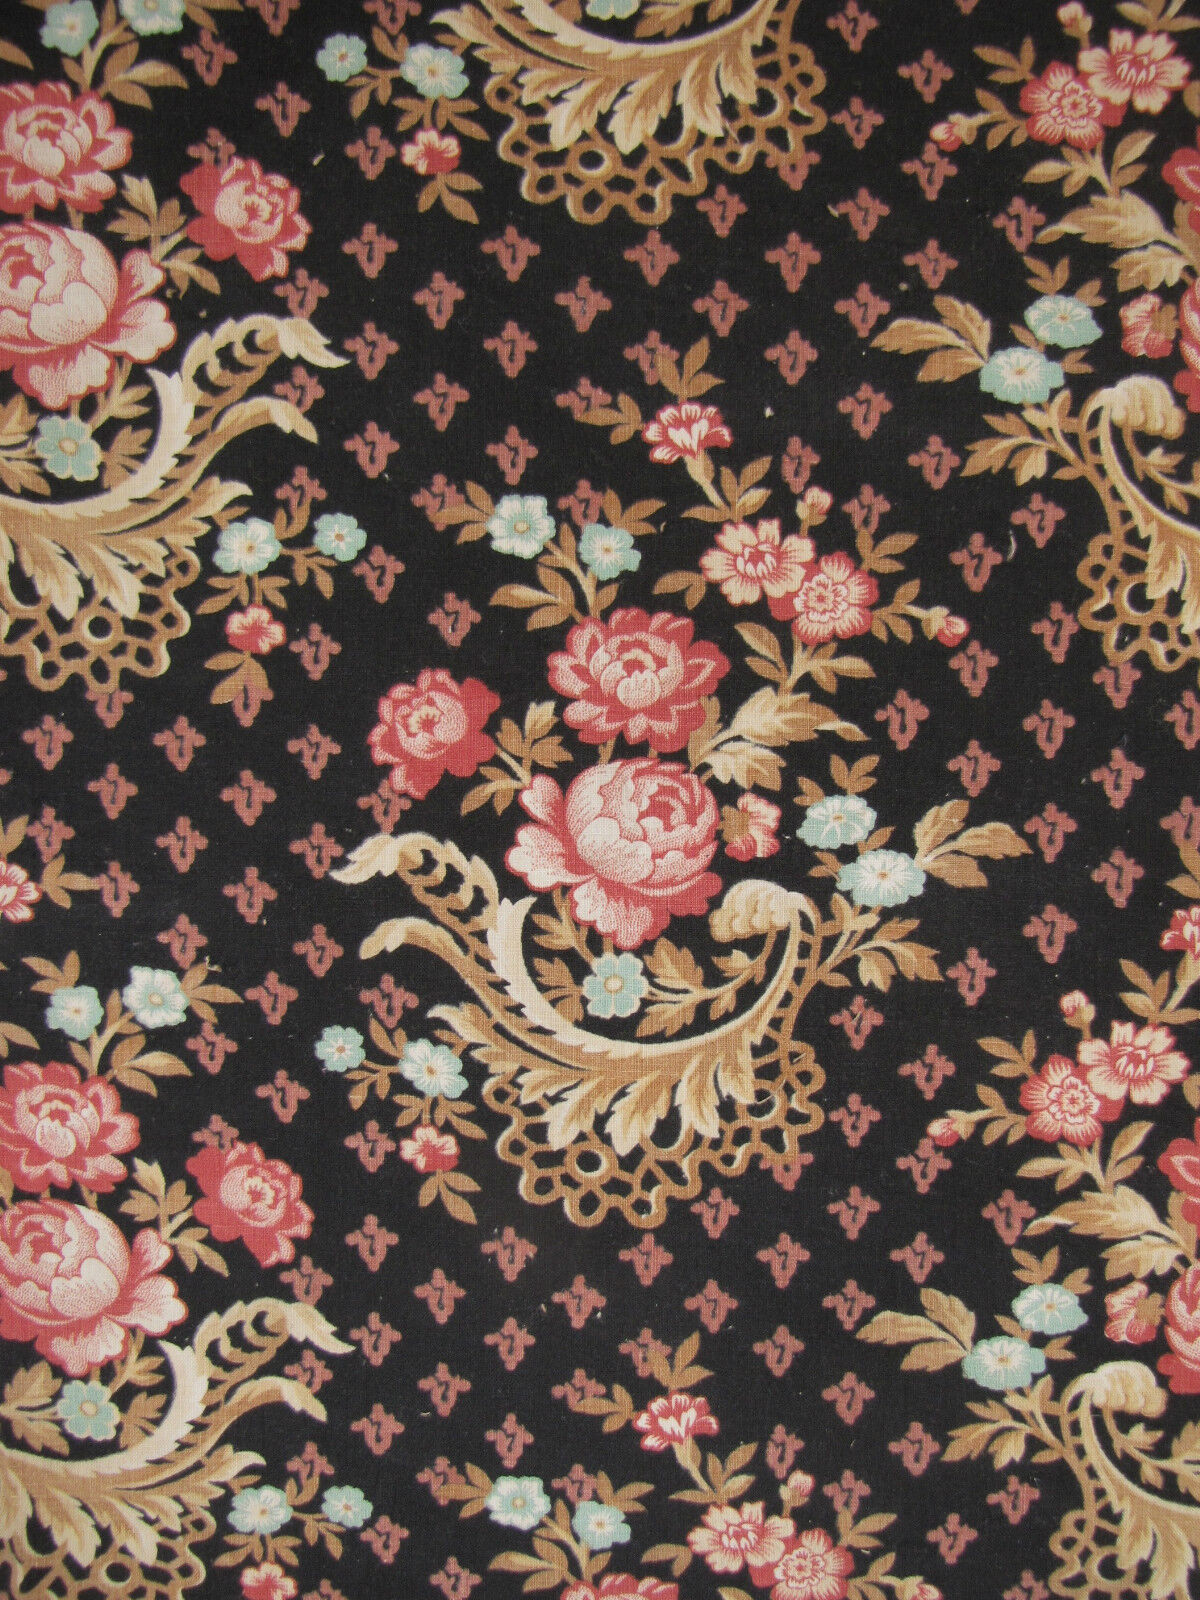 Antique French fabric c1880 Black Ground Floral Printed Rococo design textile